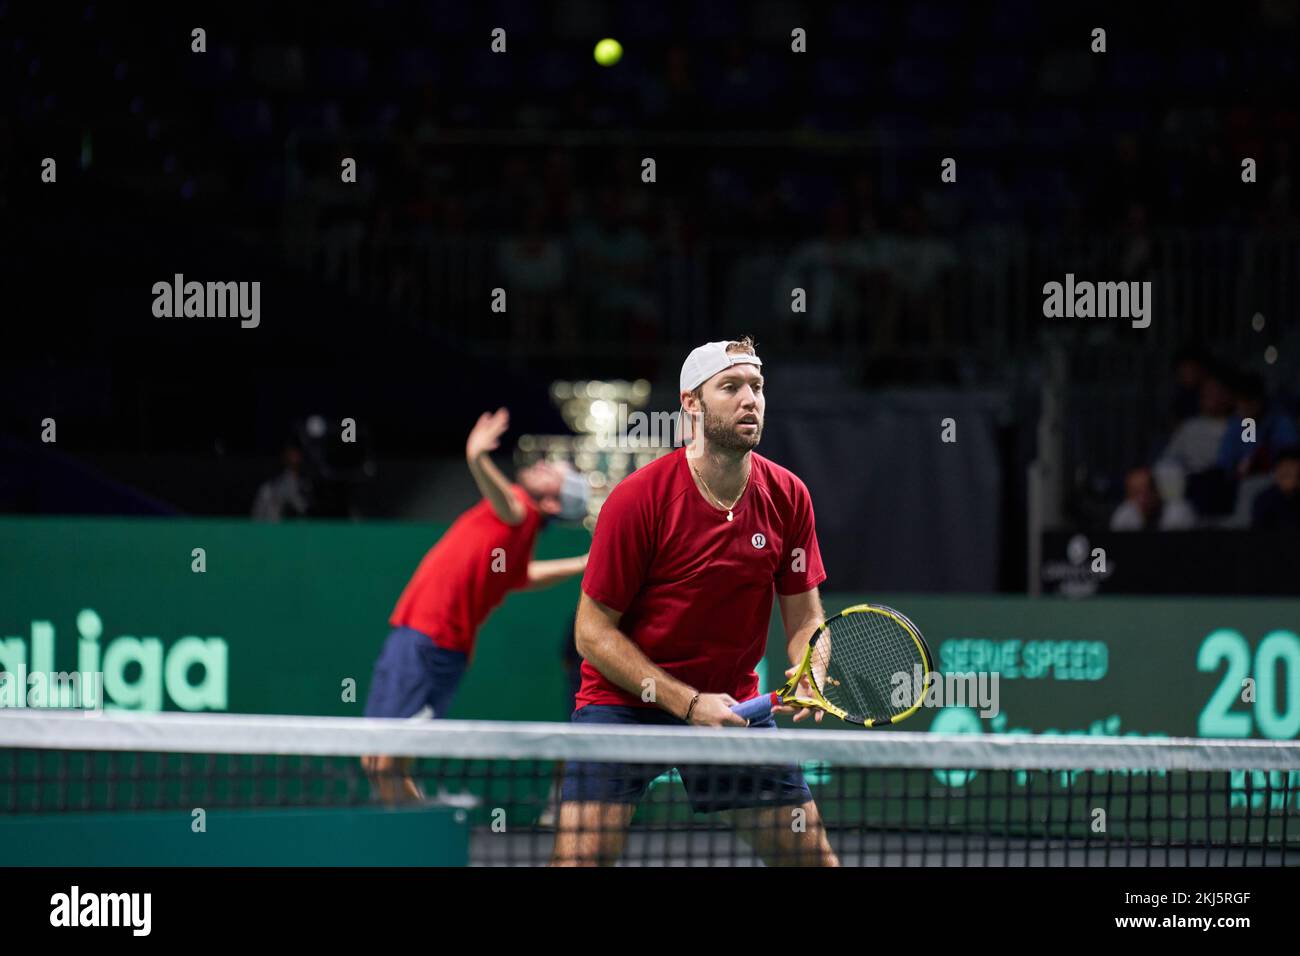 Tommy Paul and Jack Sock of USA in action against Simone Bolelli and Fabio Fognini of Italy during the Davis Cup by Rakuten Final 8 at The Palacio de Deportes Martin Carpena.